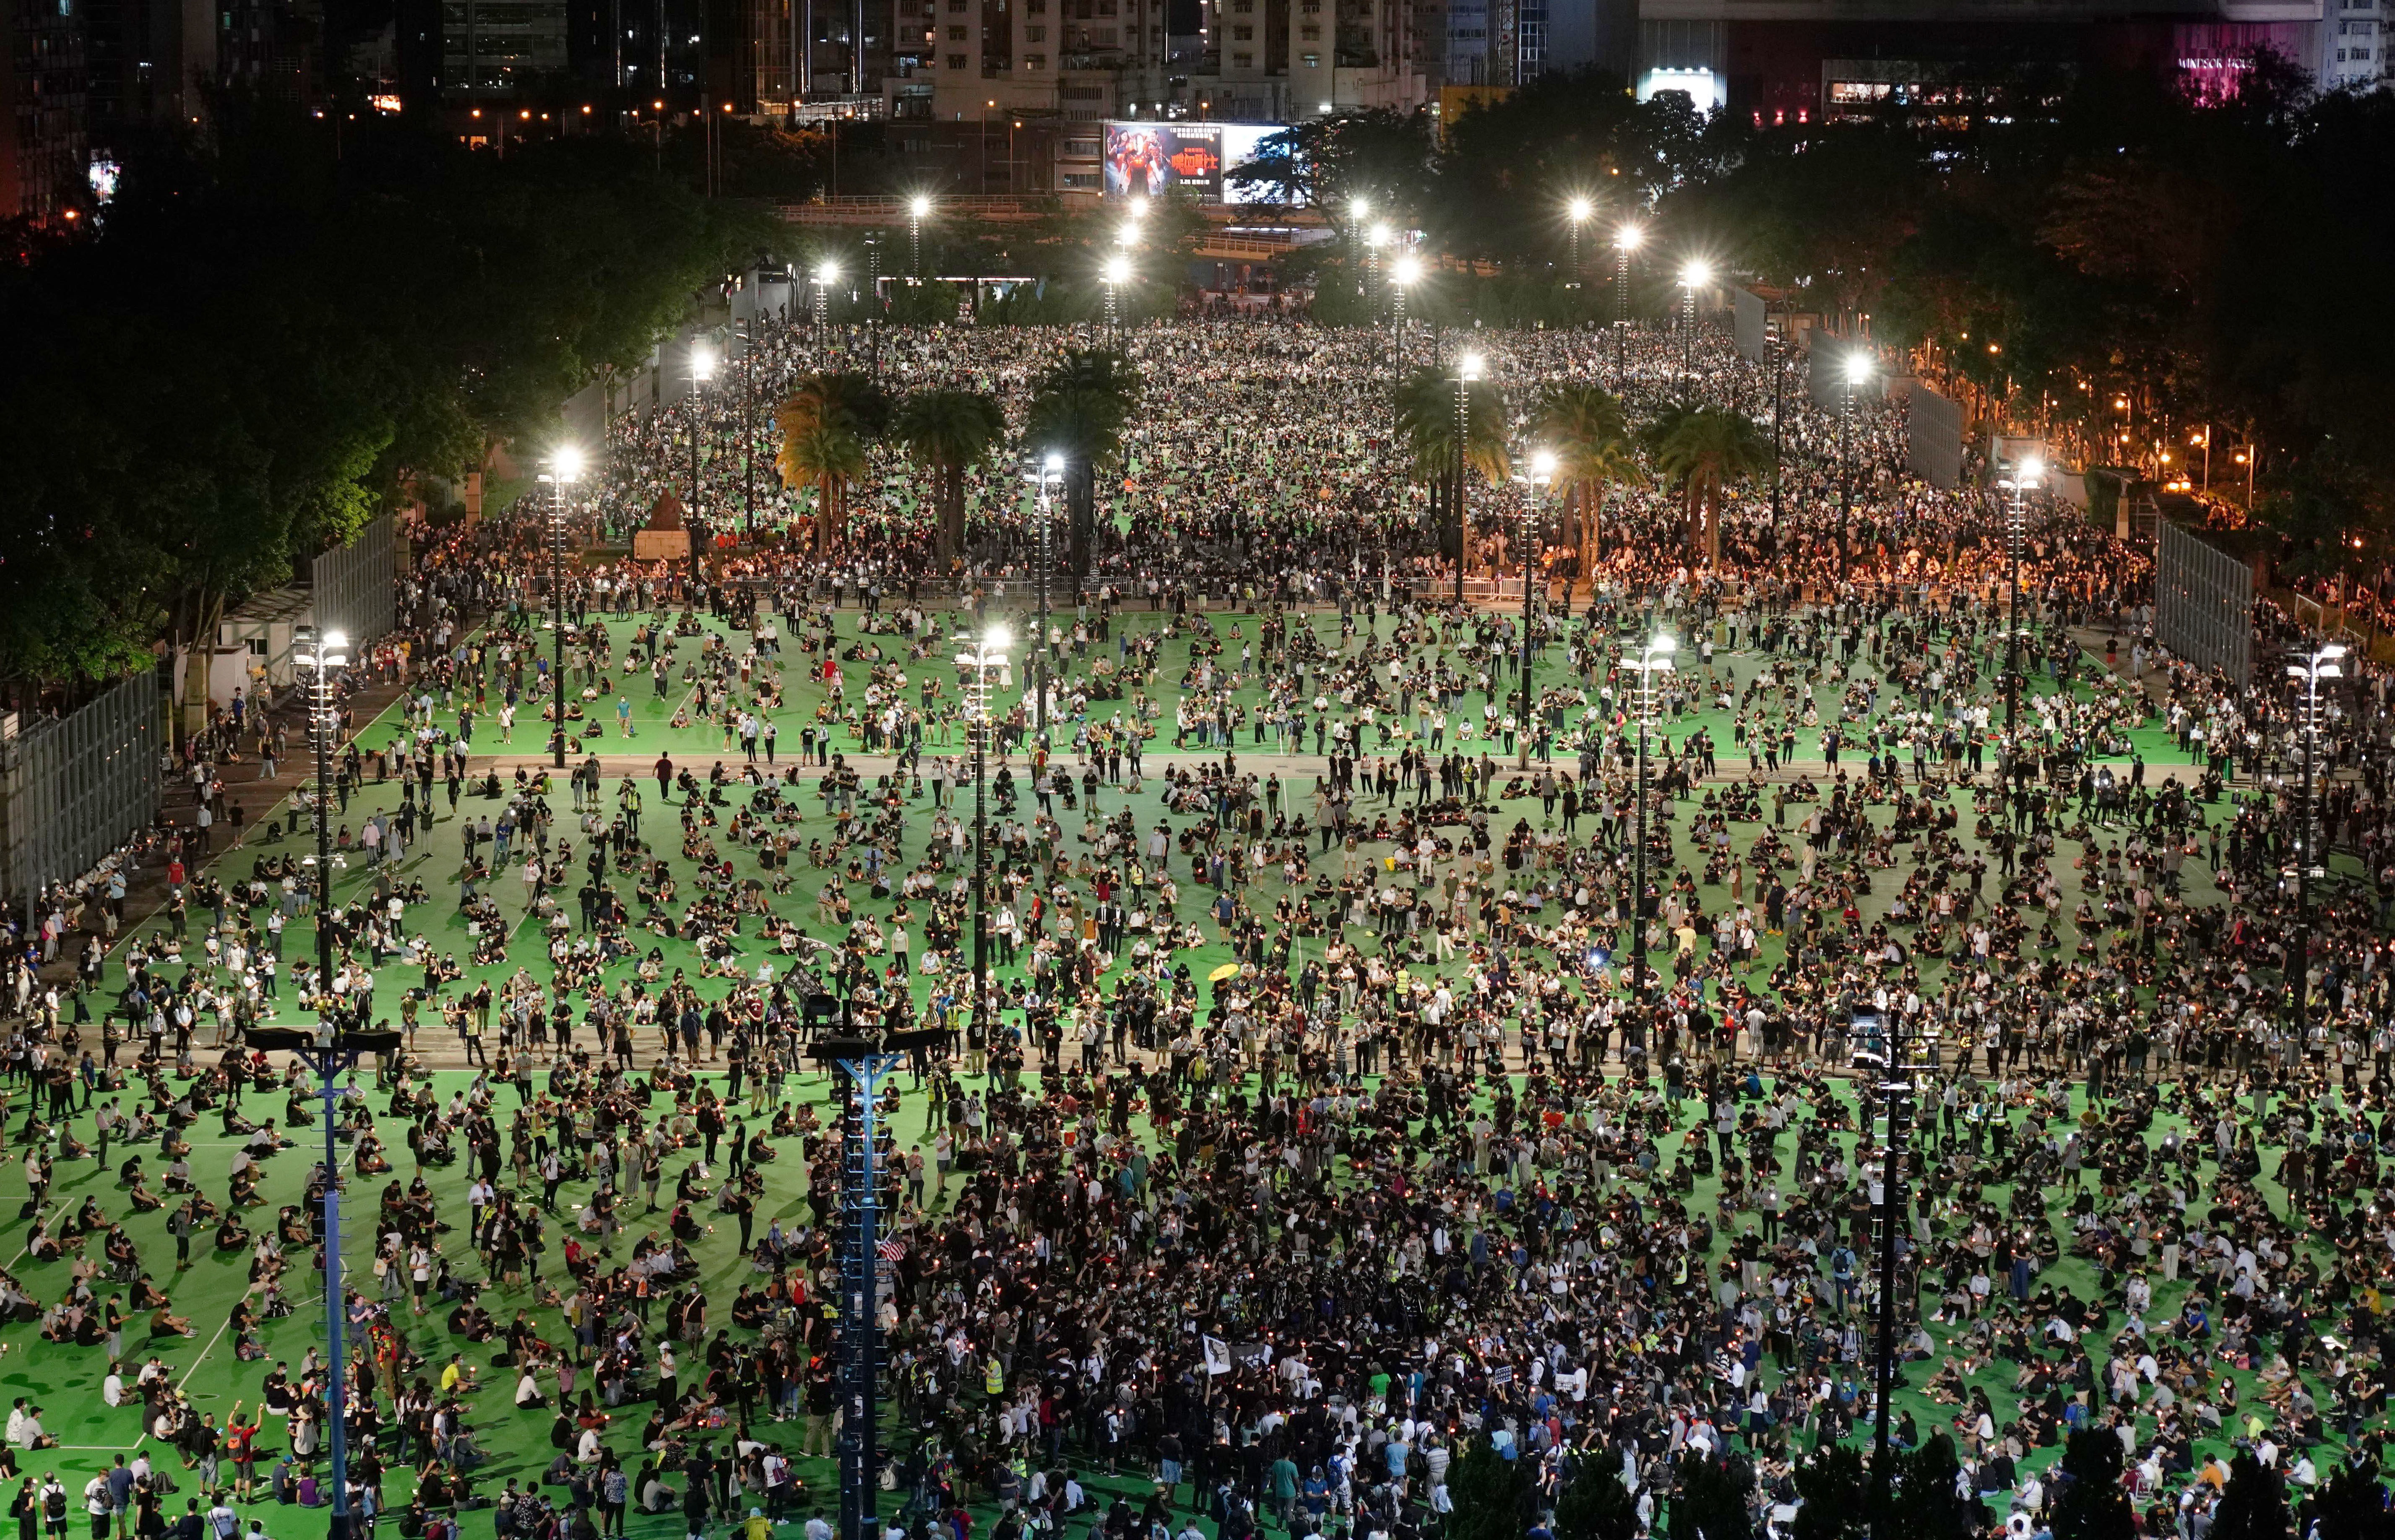 Thousands turned up at Hong Kong’s Victoria Park for the annual Tiananmen Square candlelight vigil last June despite police rejecting organisers’ application. Photo: Robert Ng